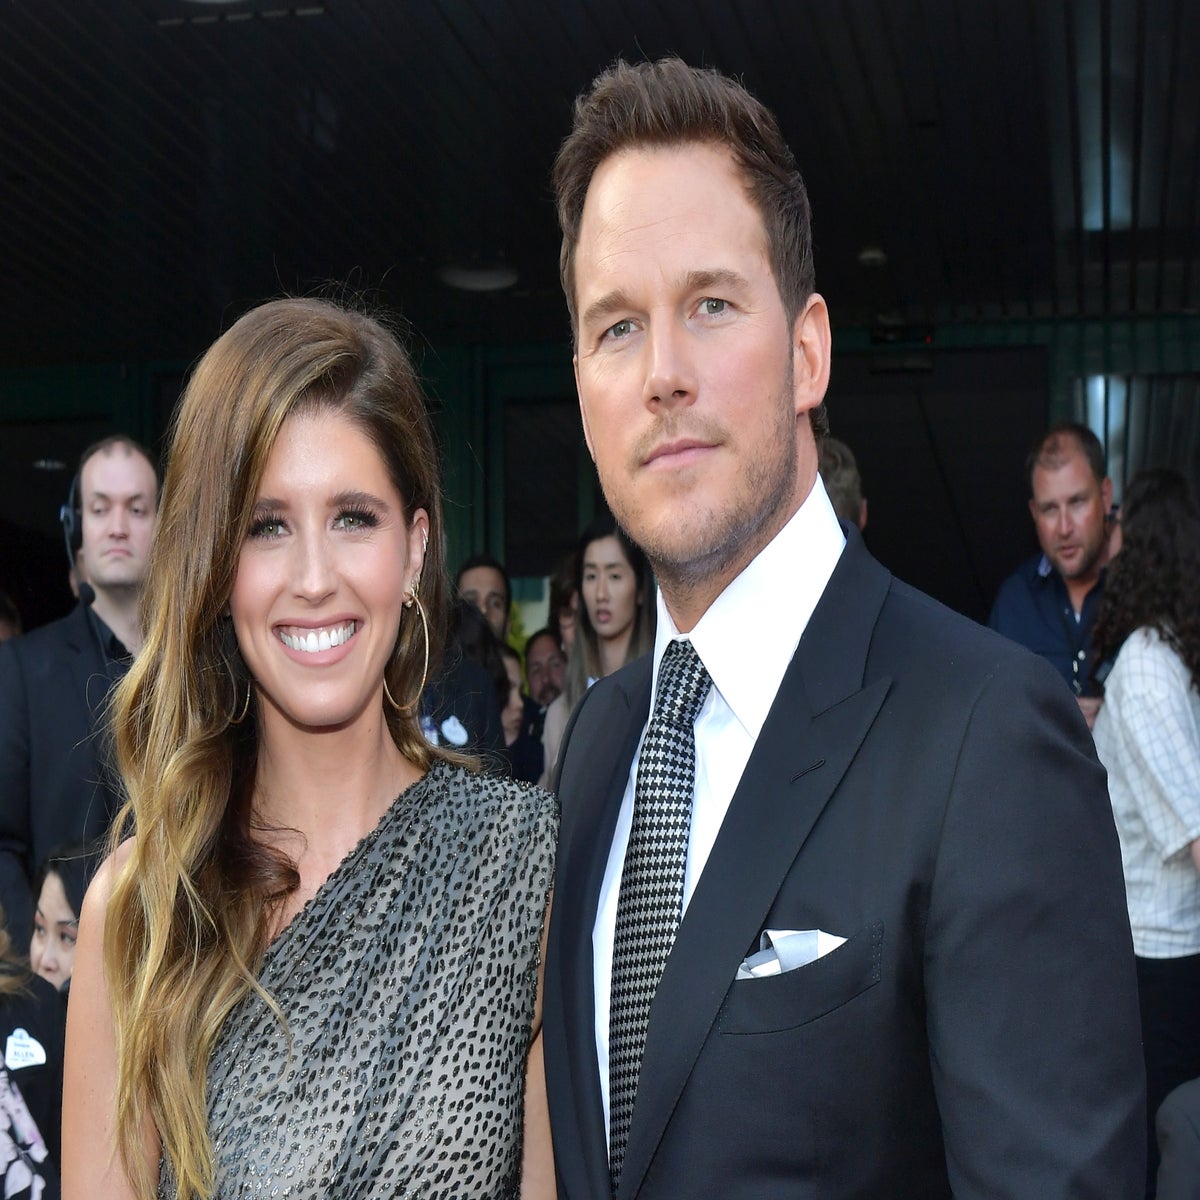 Hollywood heartthrob Chris Pratt reveals why his wife is to blame